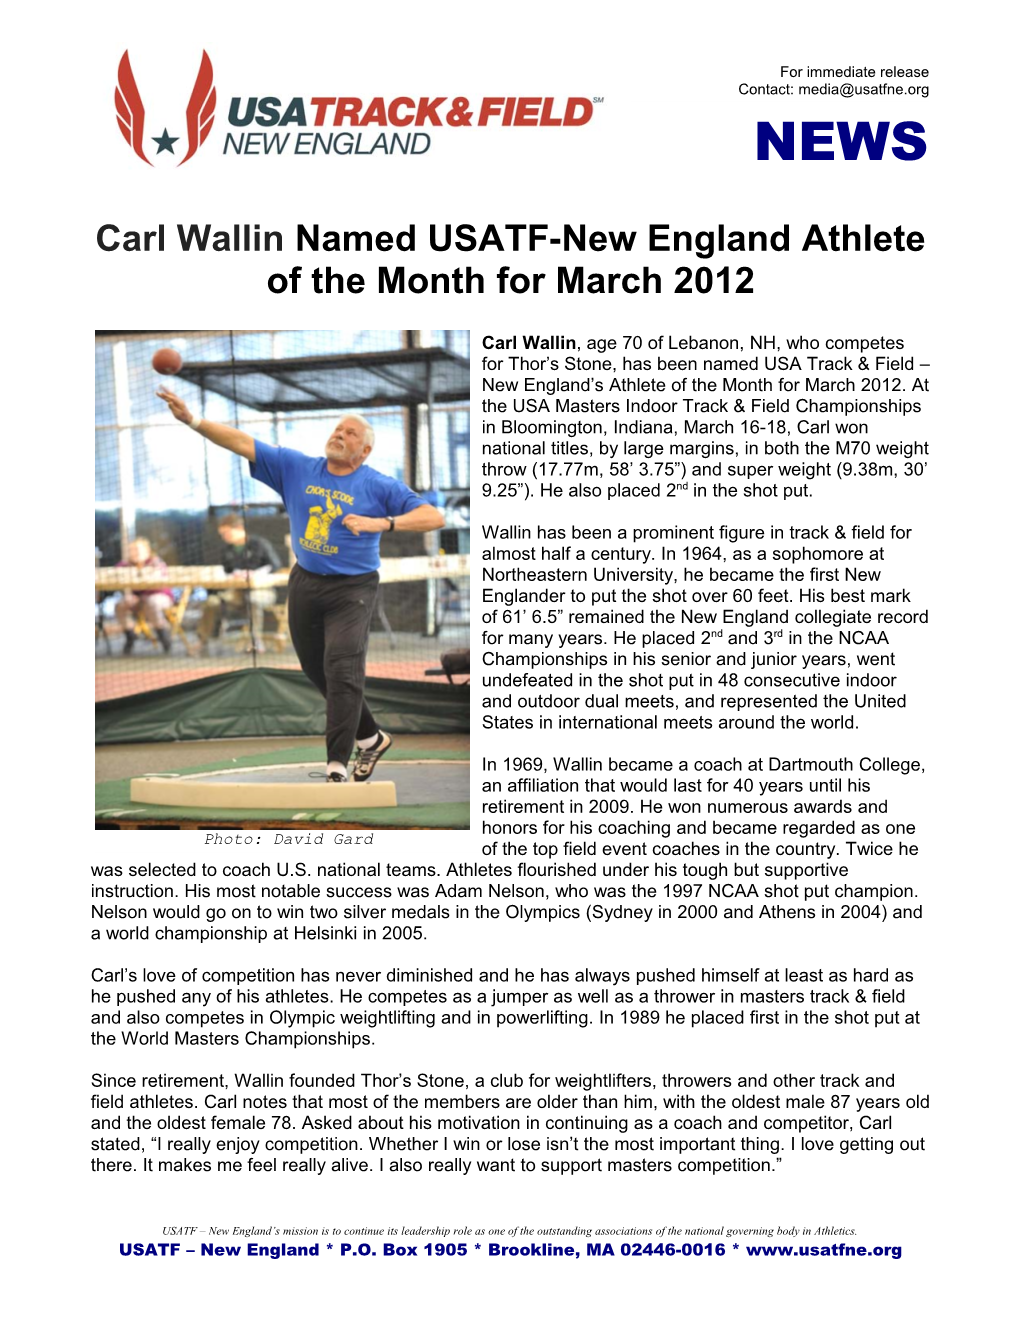 Carl Wallin Named USATF-New England Athlete of the Month for March 2012